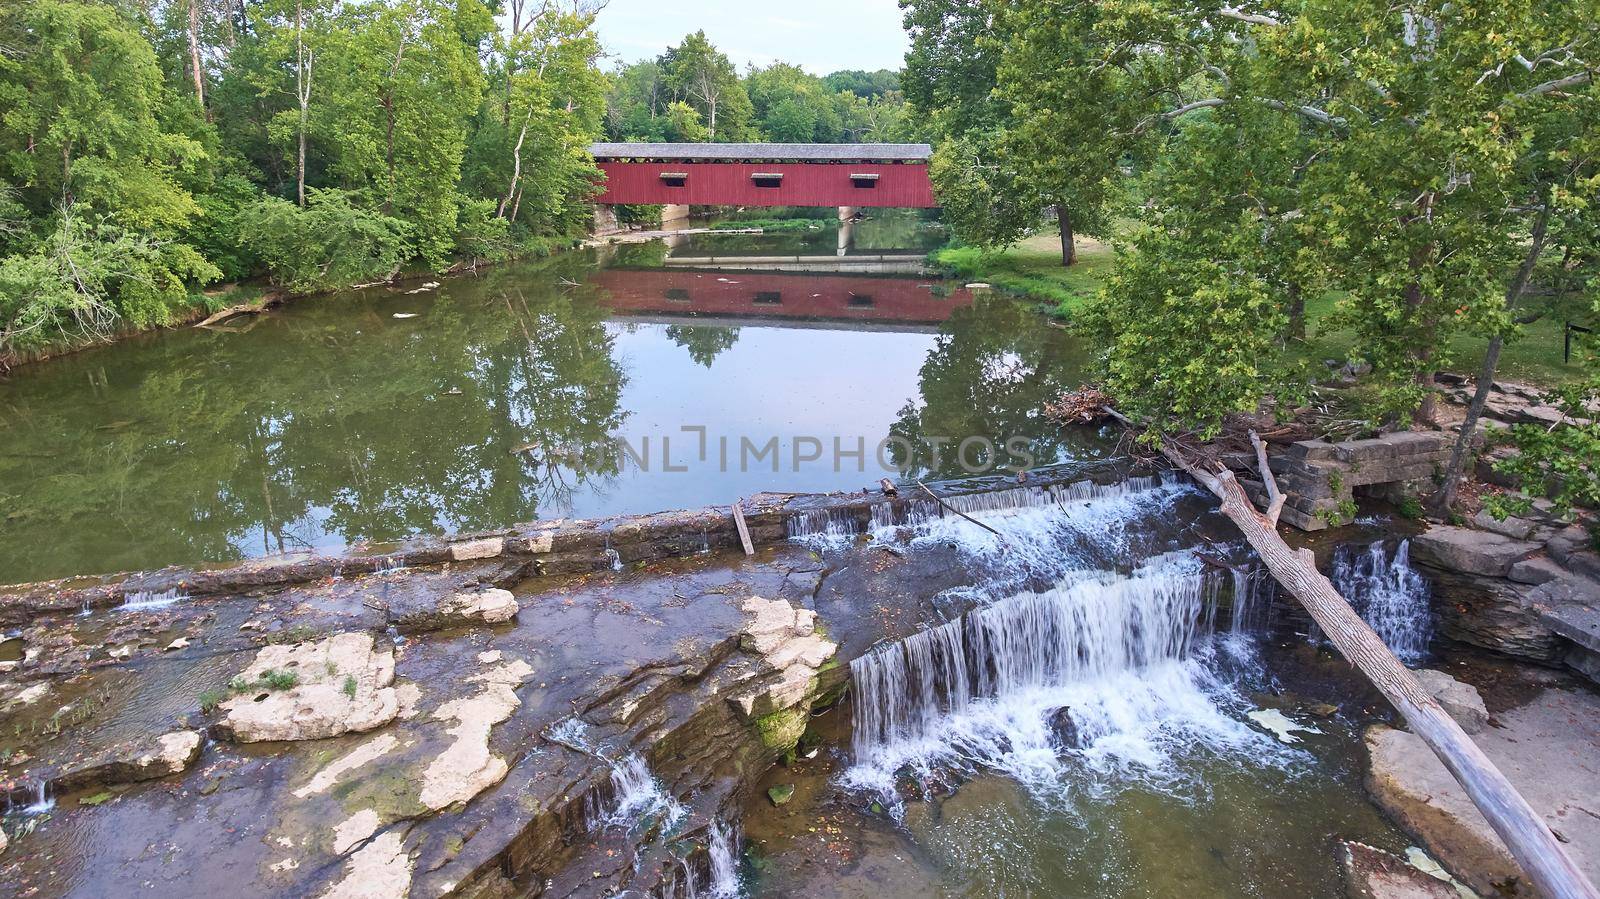 Image of Waterfall at Cataract Falls with a fallen tree collapsed over it and a covered bridge in the background